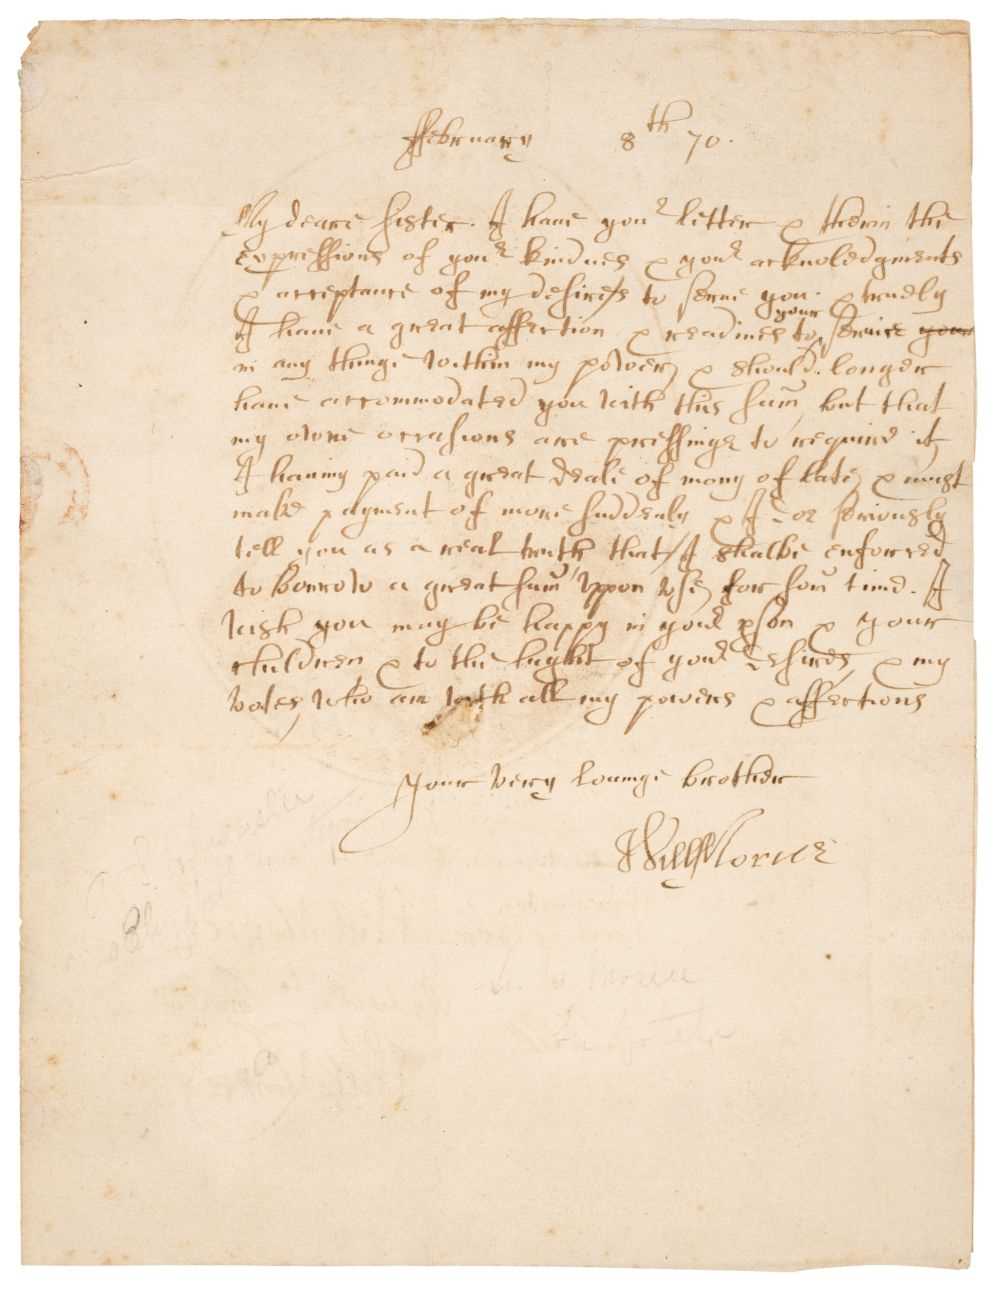 Lot 217 - Morice (William, 1602-1676). Autograph Letter Signed, ‘Will[iam] Morice’